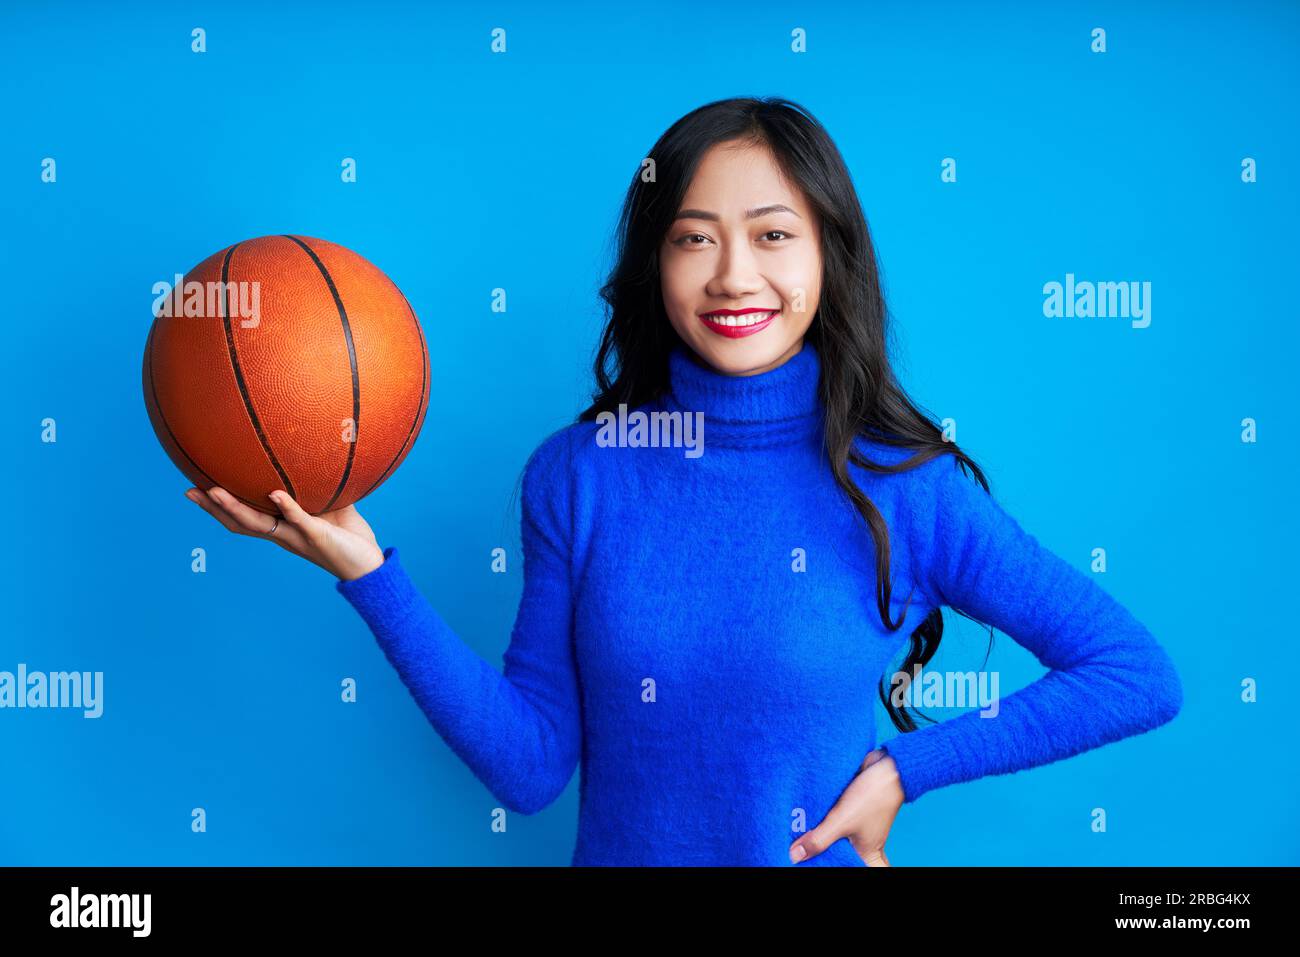 Young pretty woman with basketball in hand isolated on blue background. sport, leisure concept Stock Photo